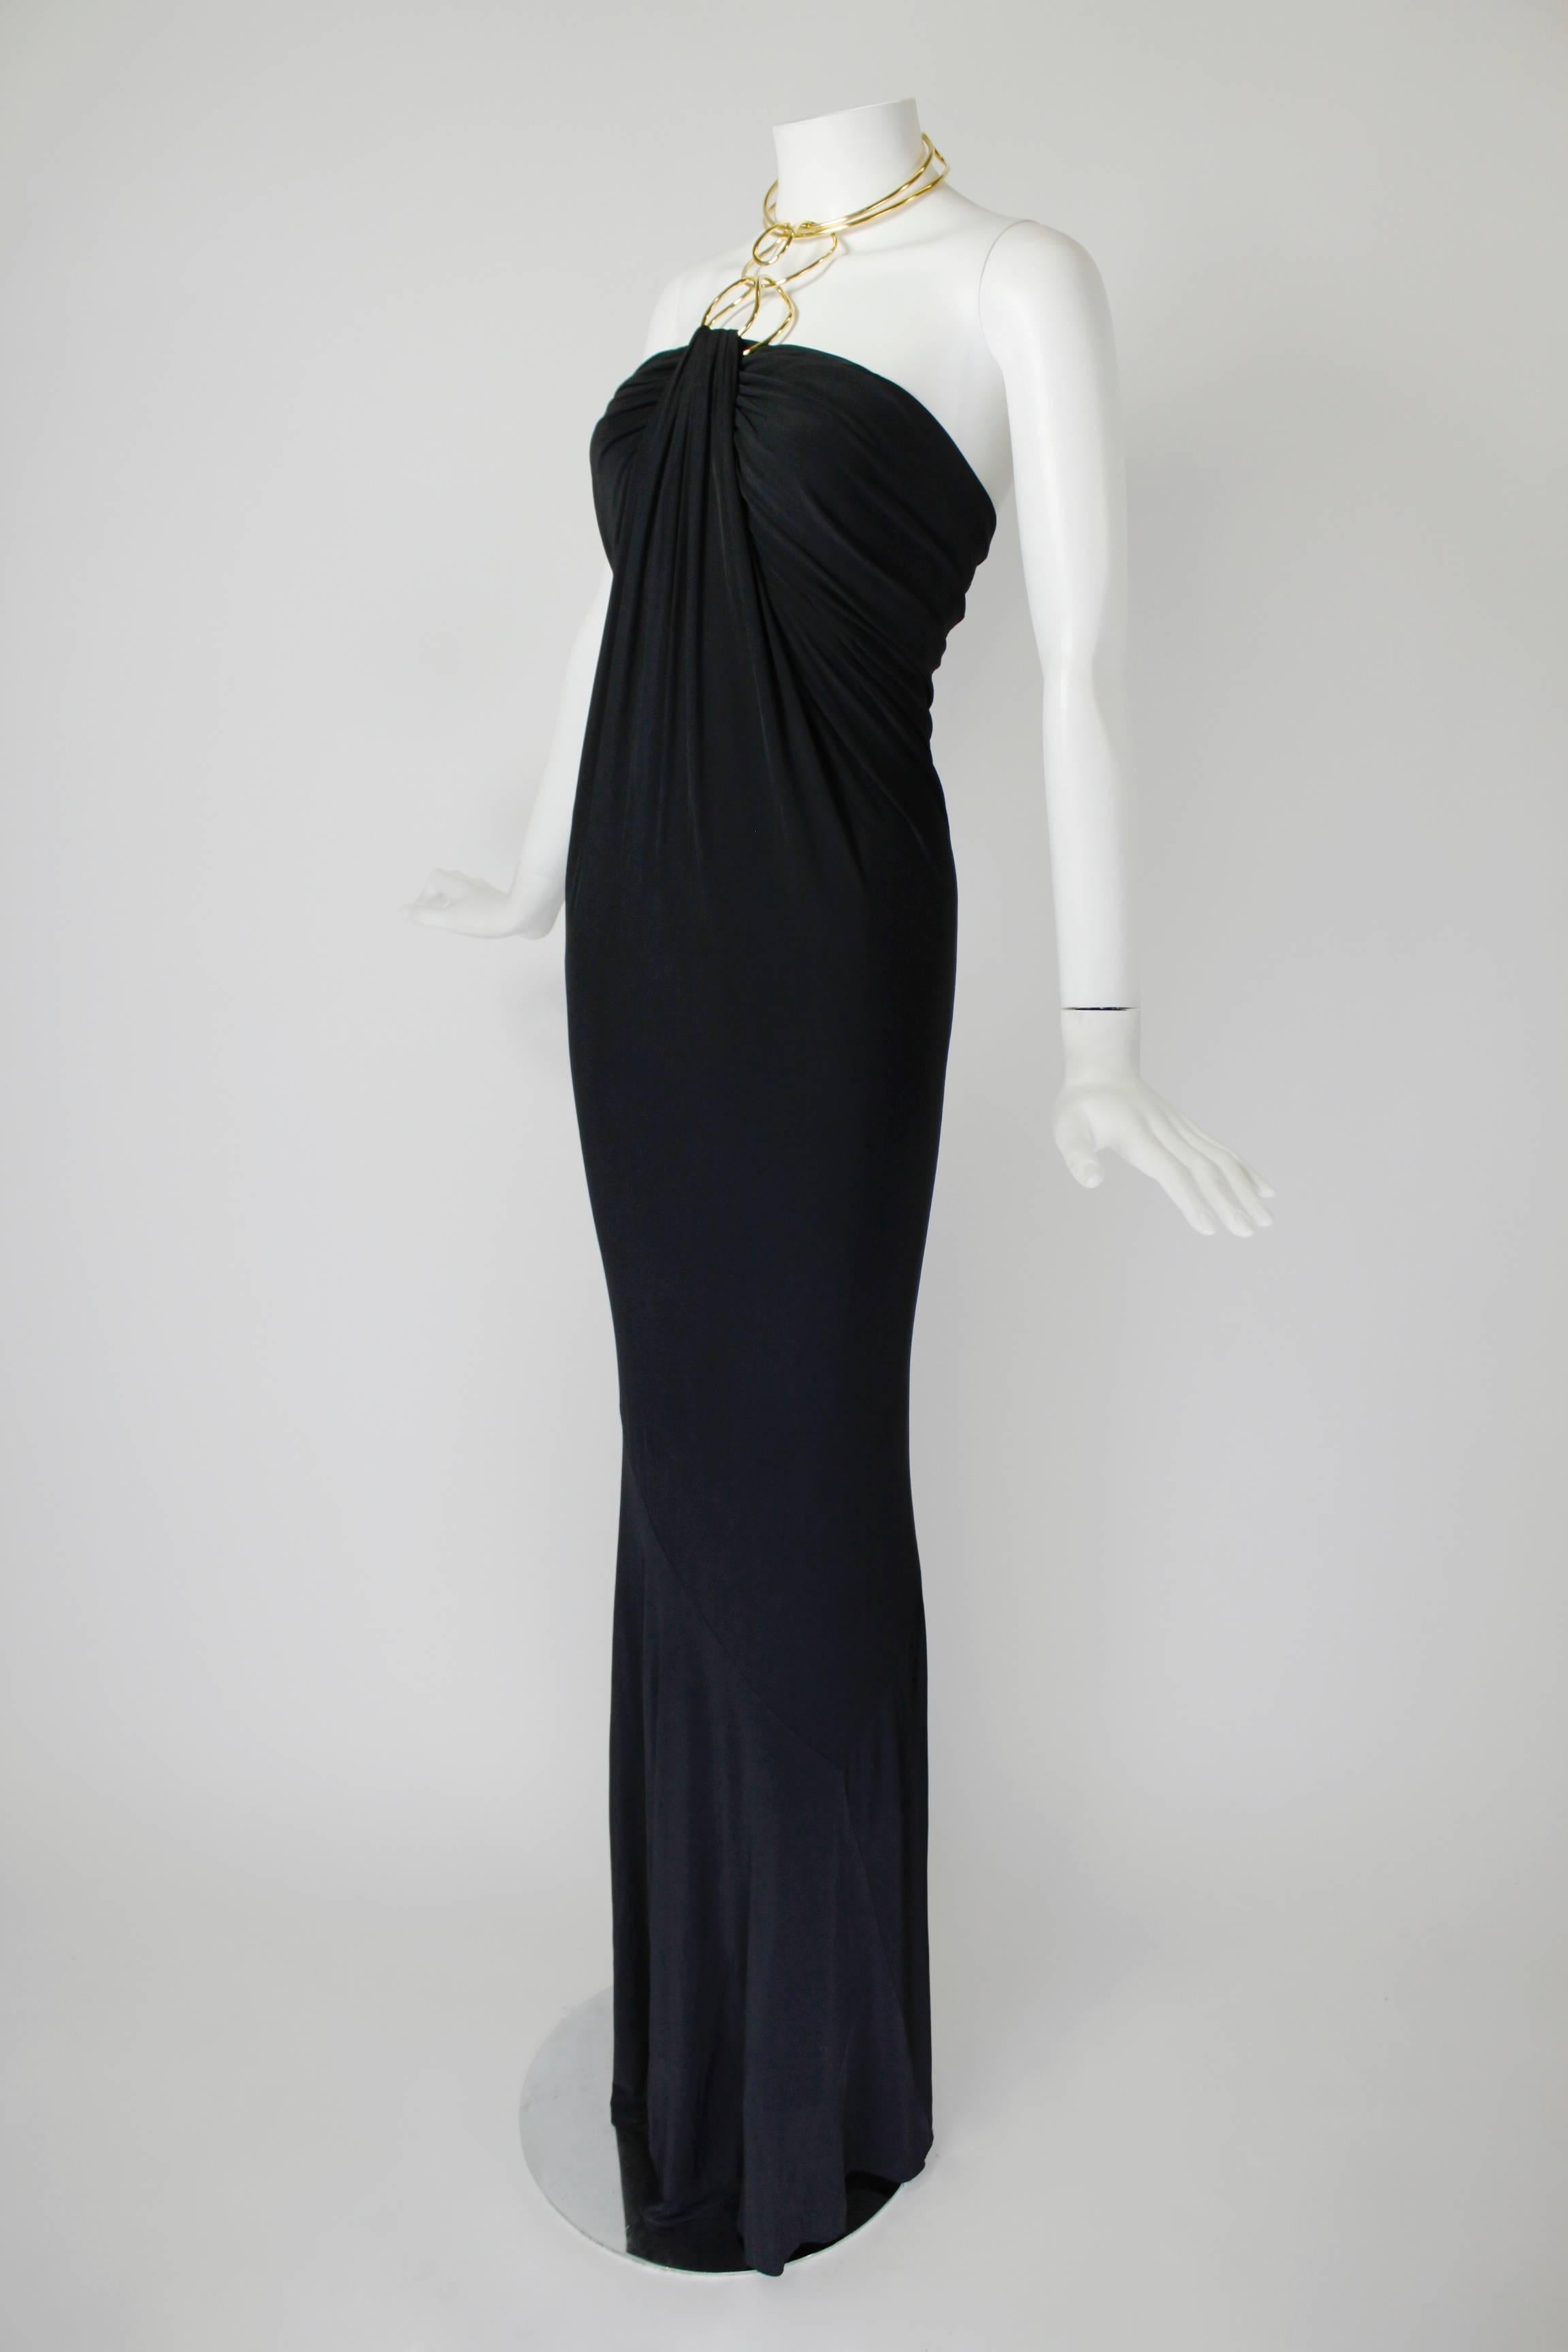 1990s Donna Karan Slinky Black Jersey Gown with Gold Choker Halter In Excellent Condition For Sale In Los Angeles, CA